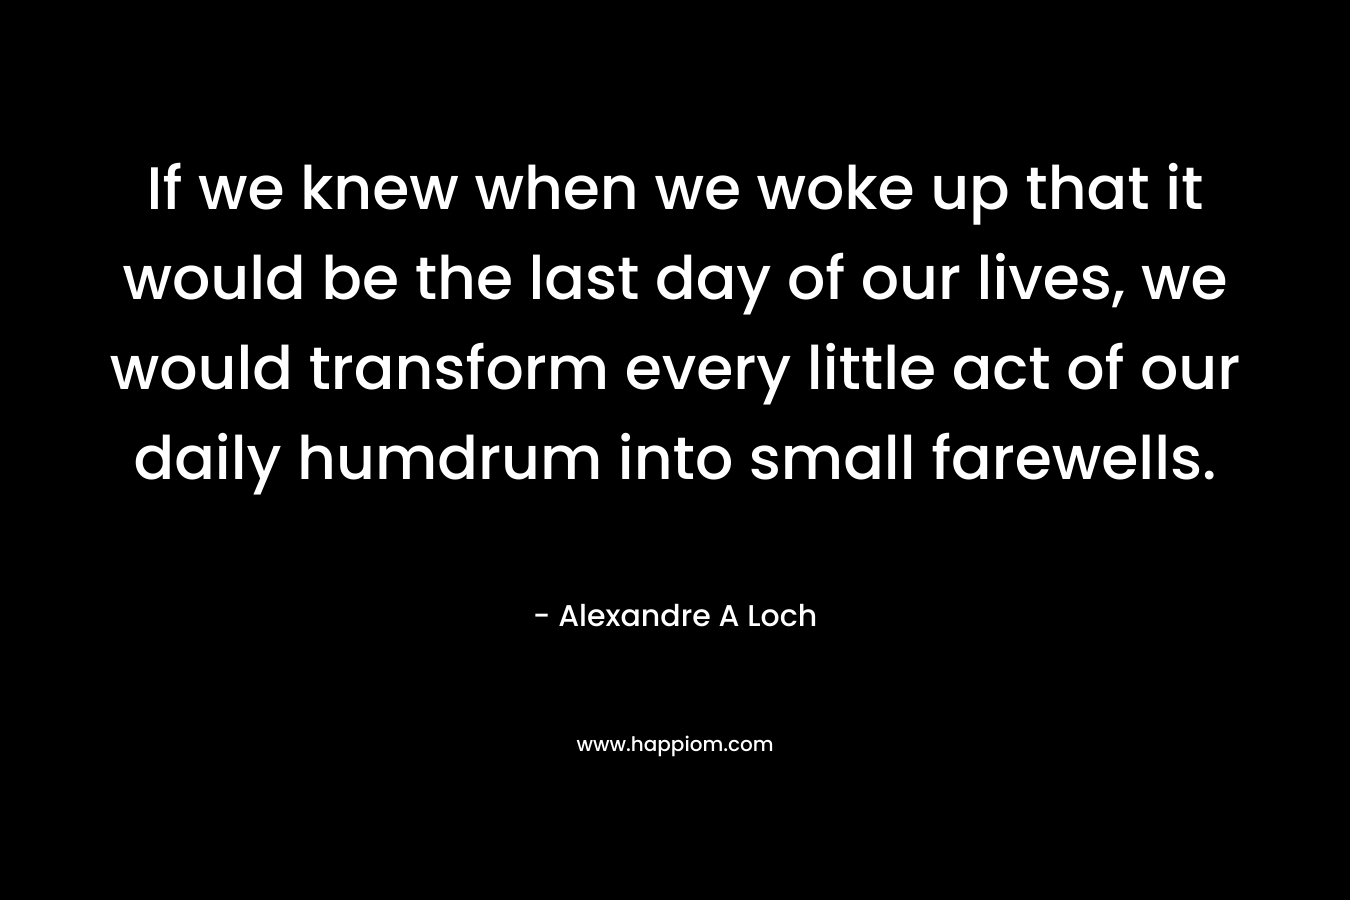 If we knew when we woke up that it would be the last day of our lives, we would transform every little act of our daily humdrum into small farewells.